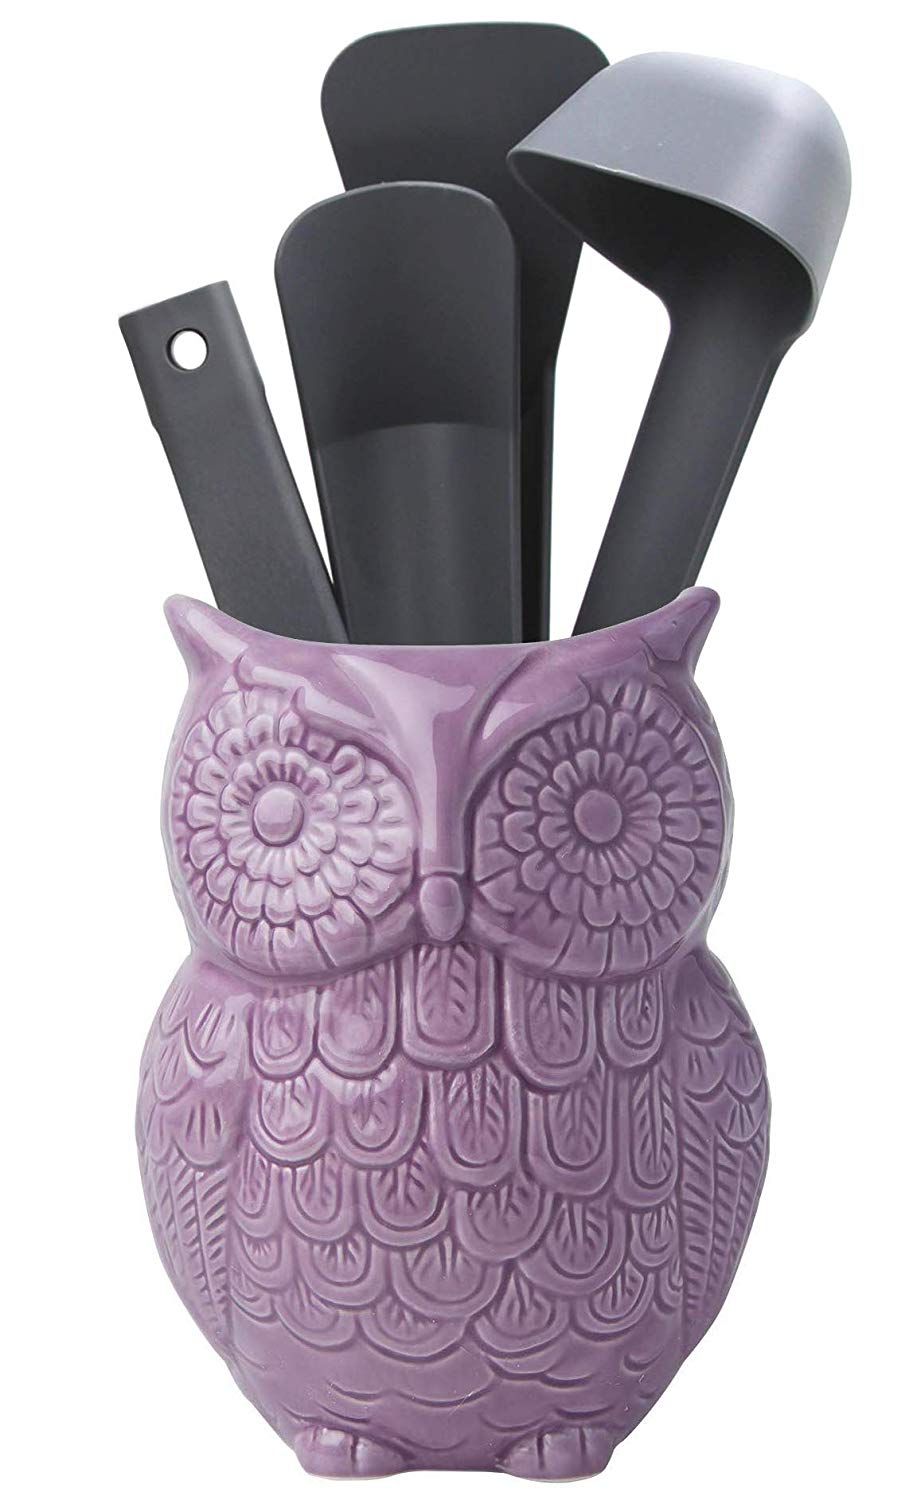 Comfify Owl Utensil Holder Decorative Ceramic Cookware Crock & Organizer, in Lovely Purple Color - Utensil Caddy and Perfect Kitchen Ceramic Décor Gift - 5” x 7” x 4” Size